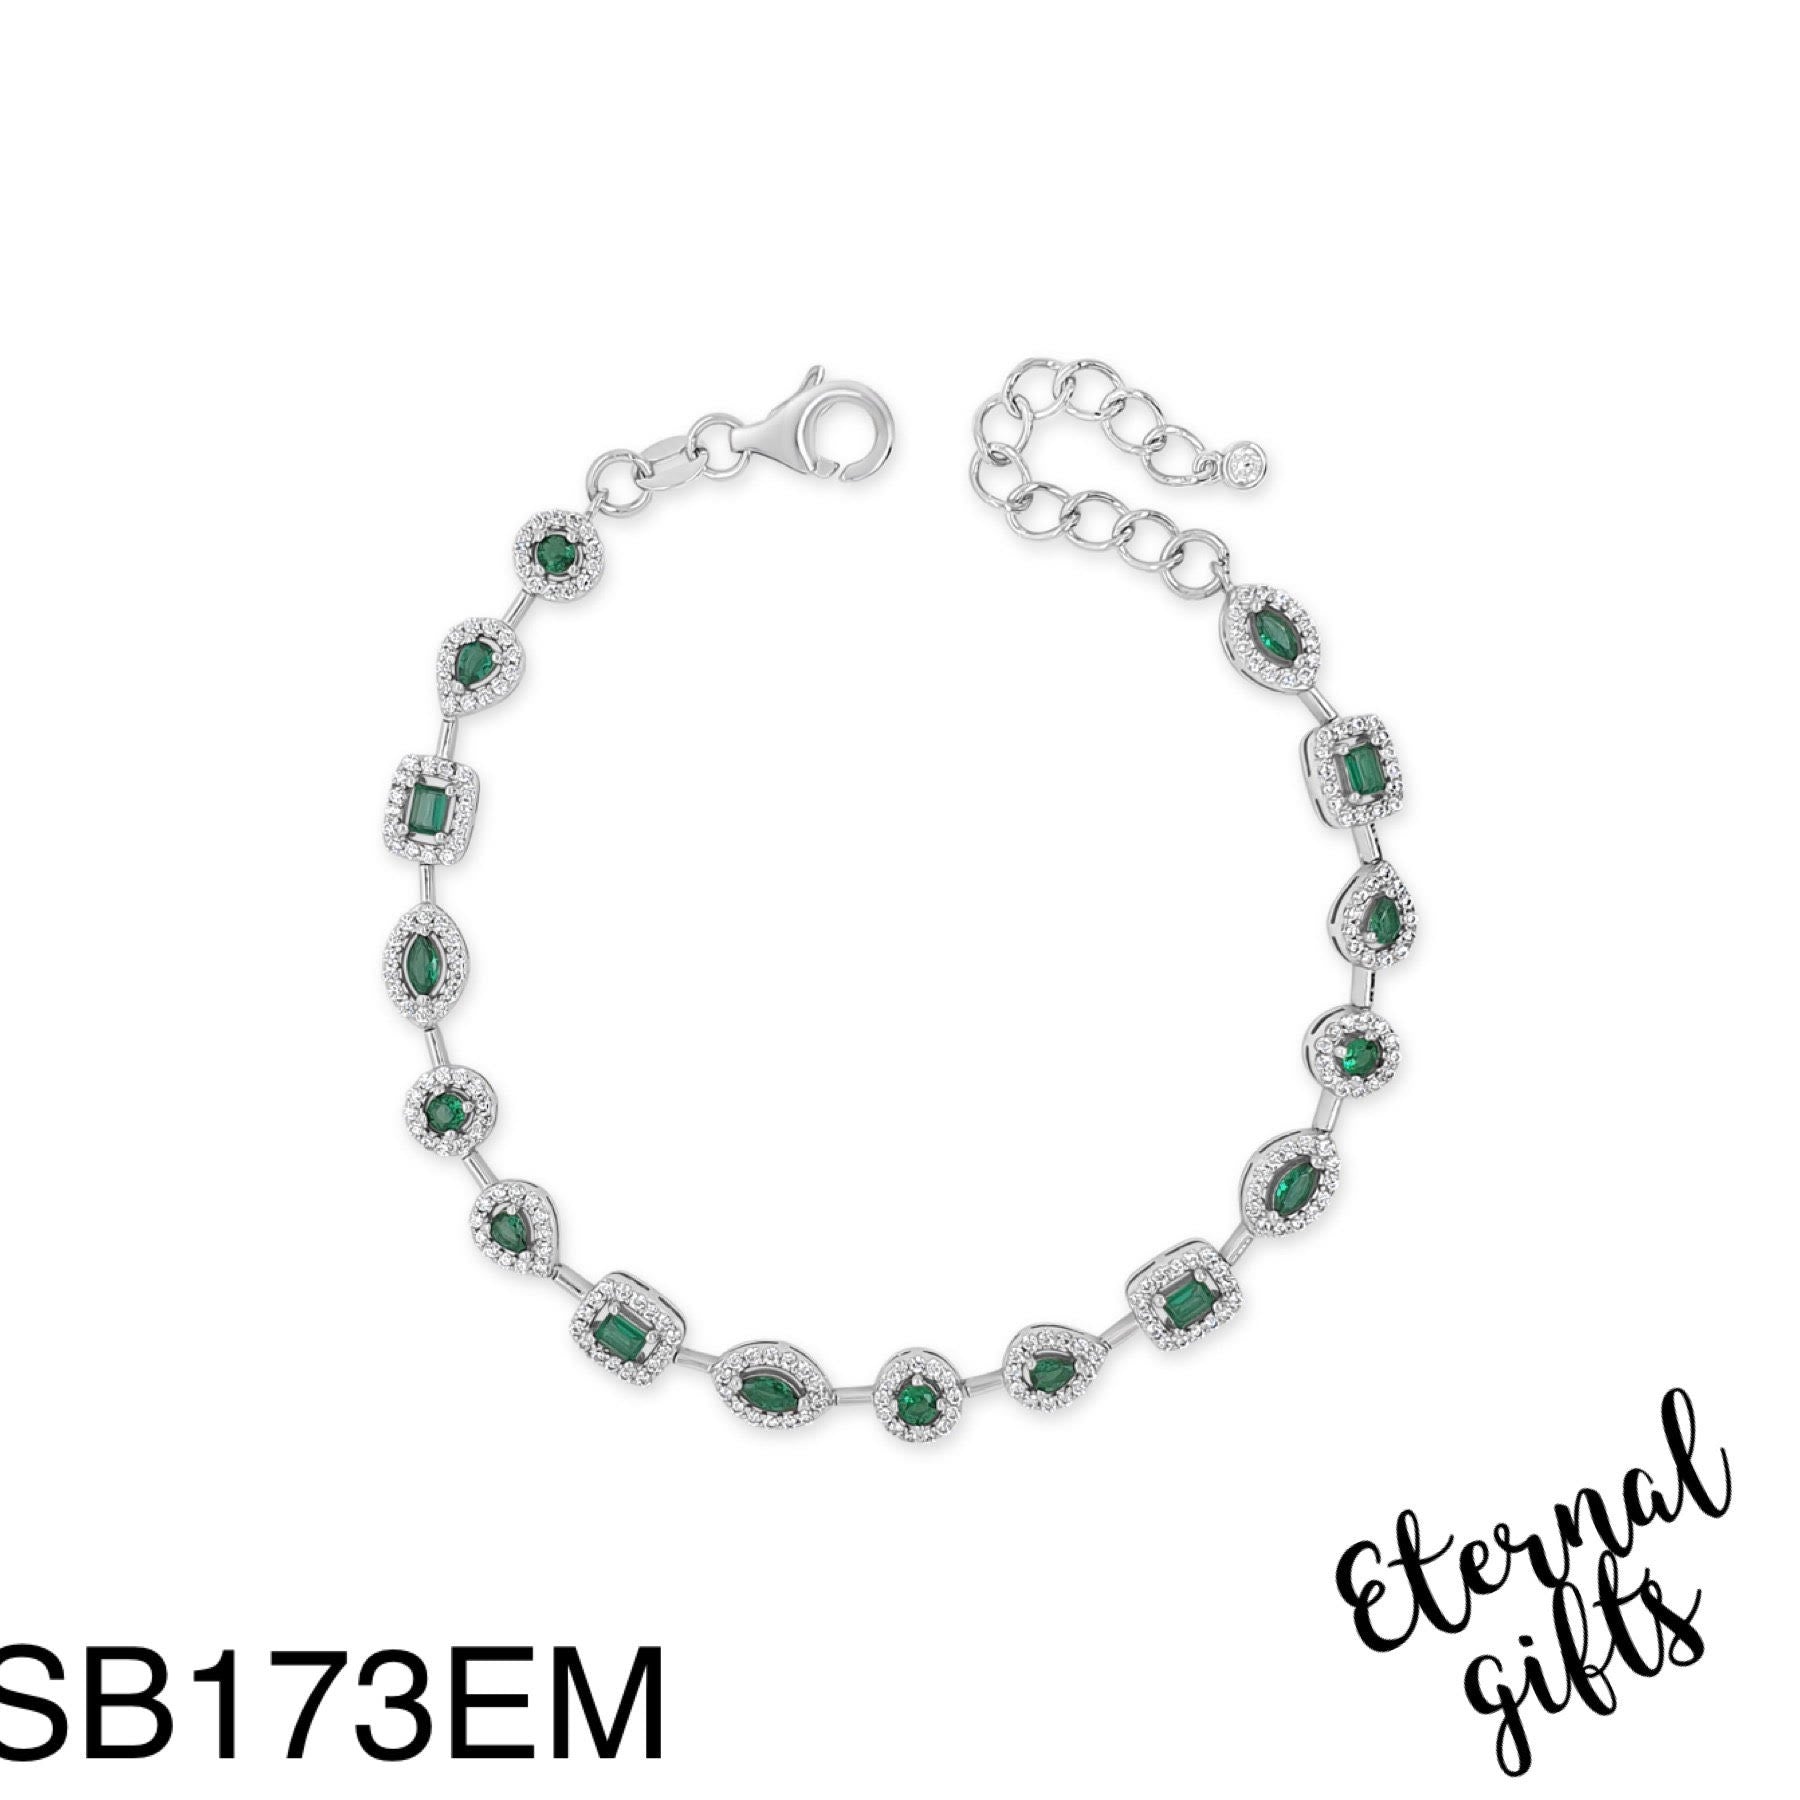 SB173EM Silver Emerald Bracelet from The Emerald Collection - Silver by Absolute